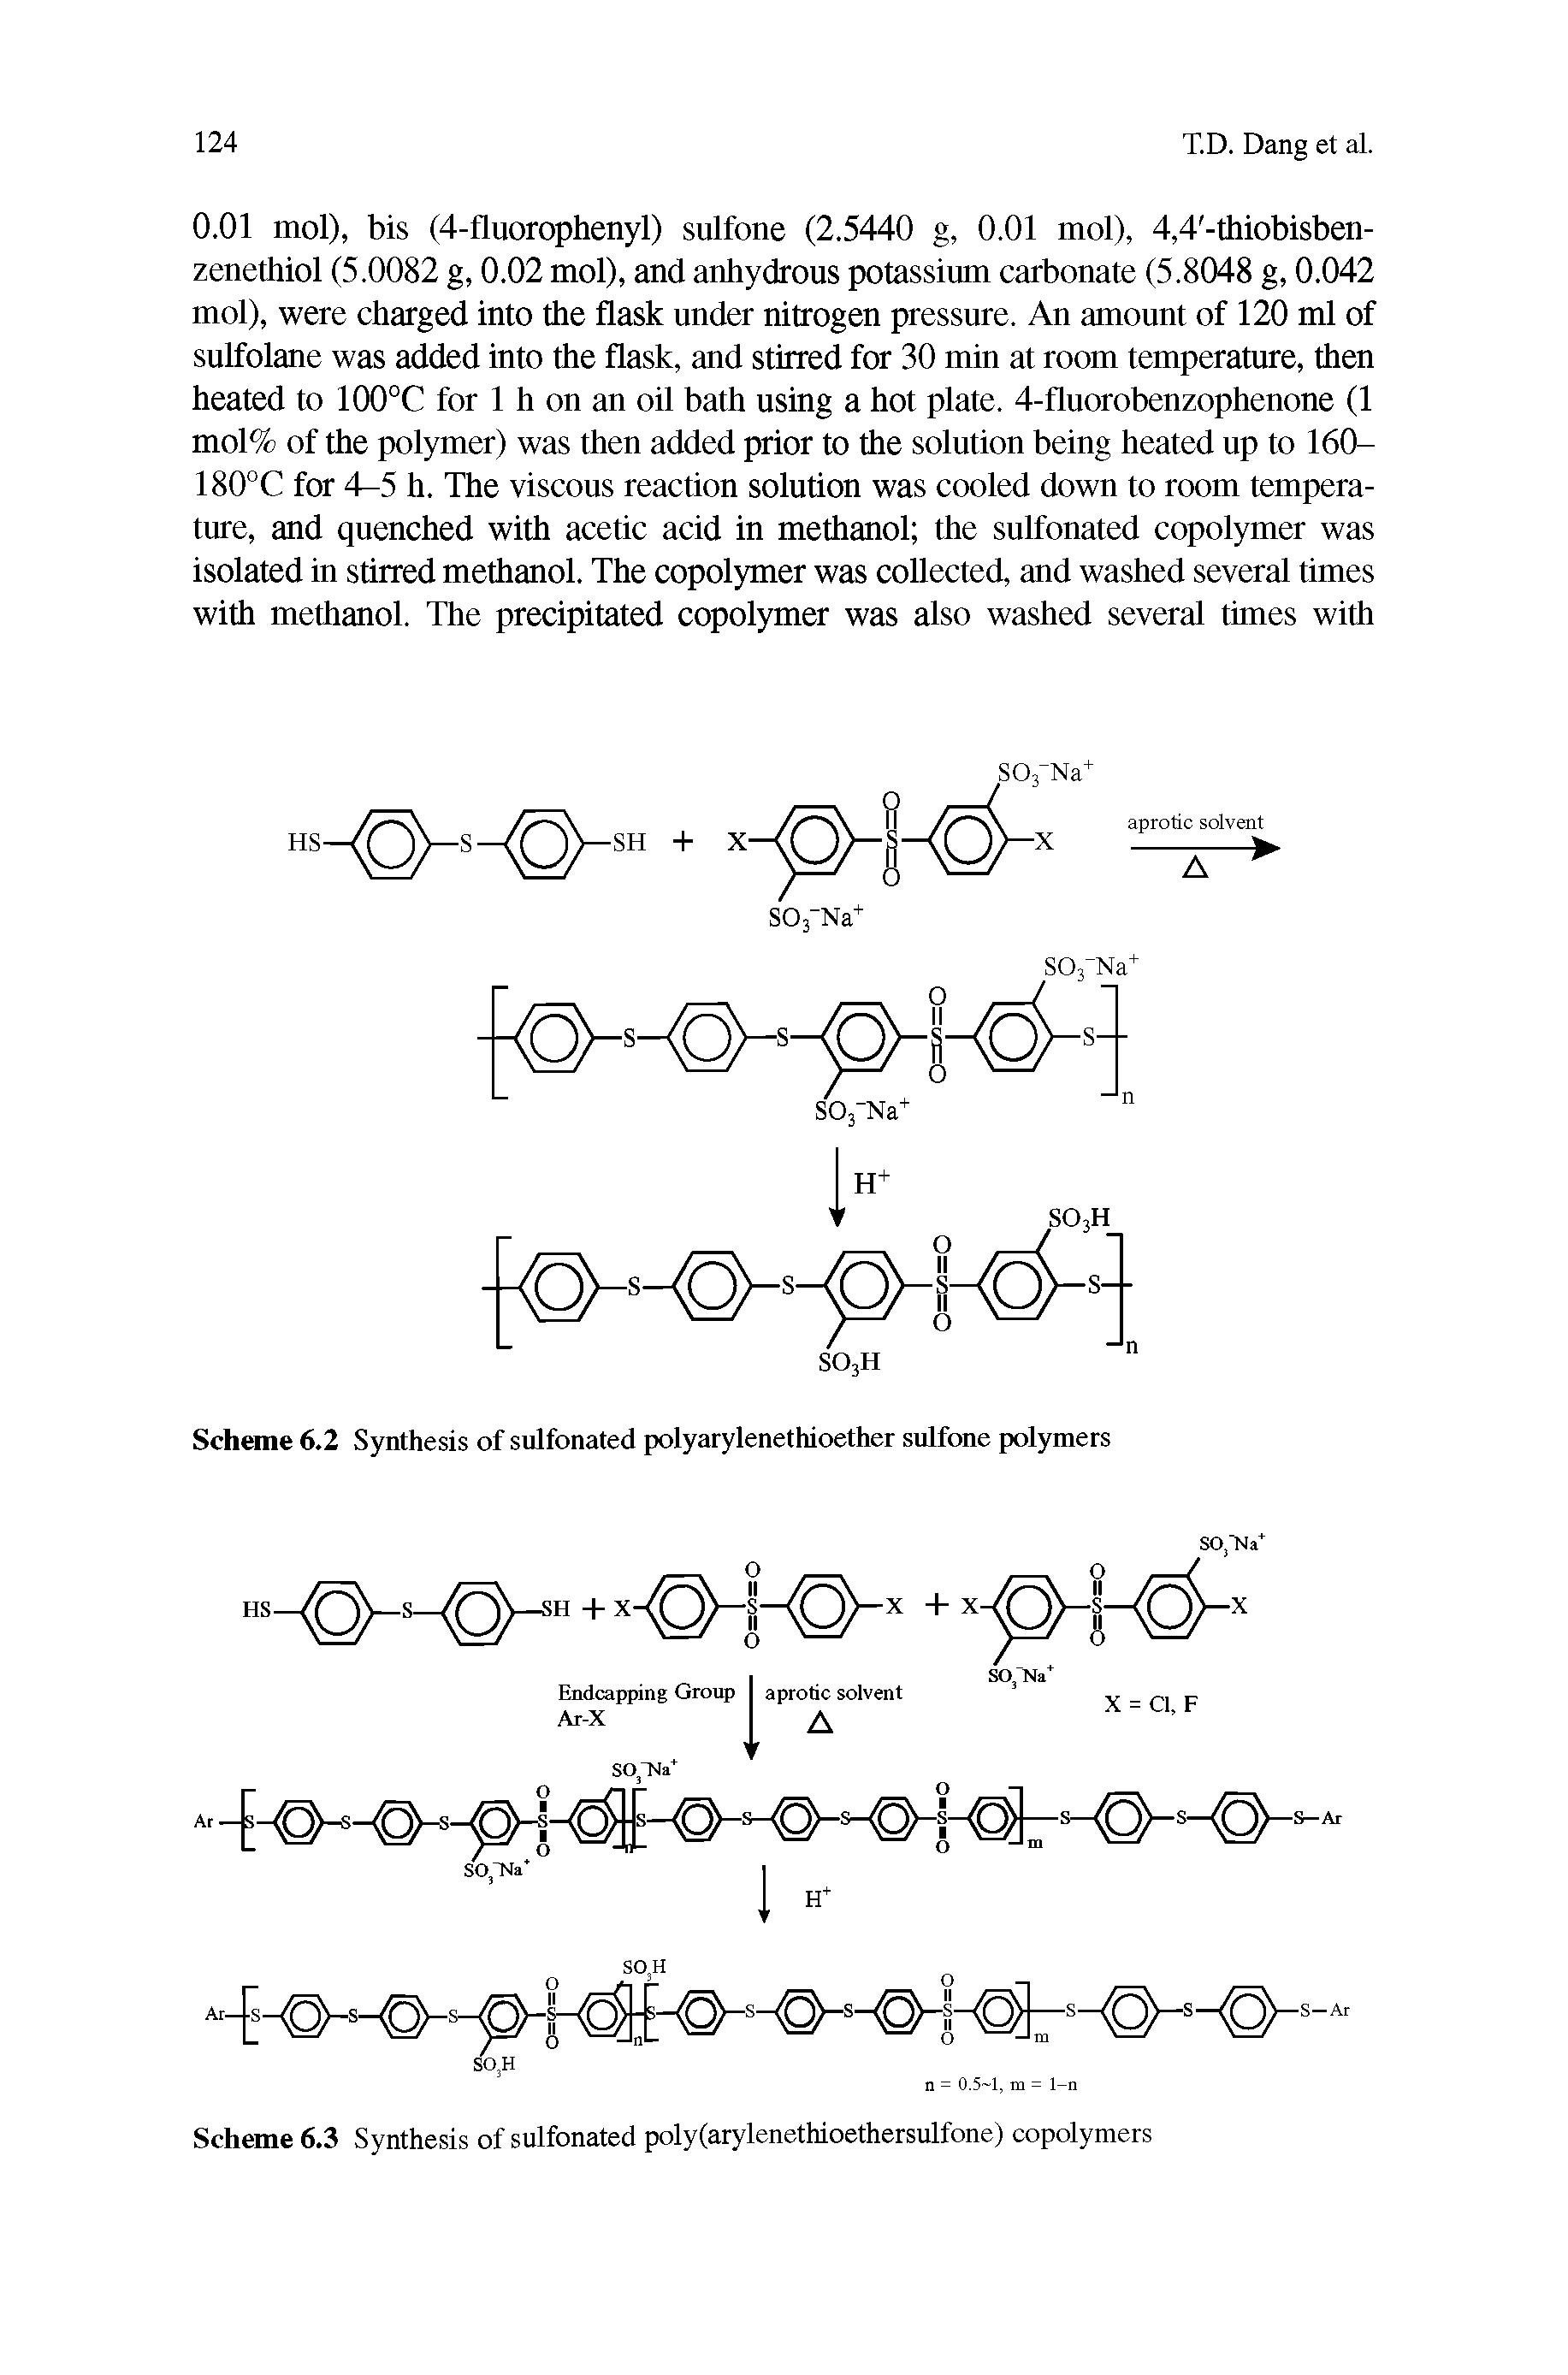 Scheme 6.3 Synthesis of sulfonated poly(arylenethioethersulfone) copolymers...